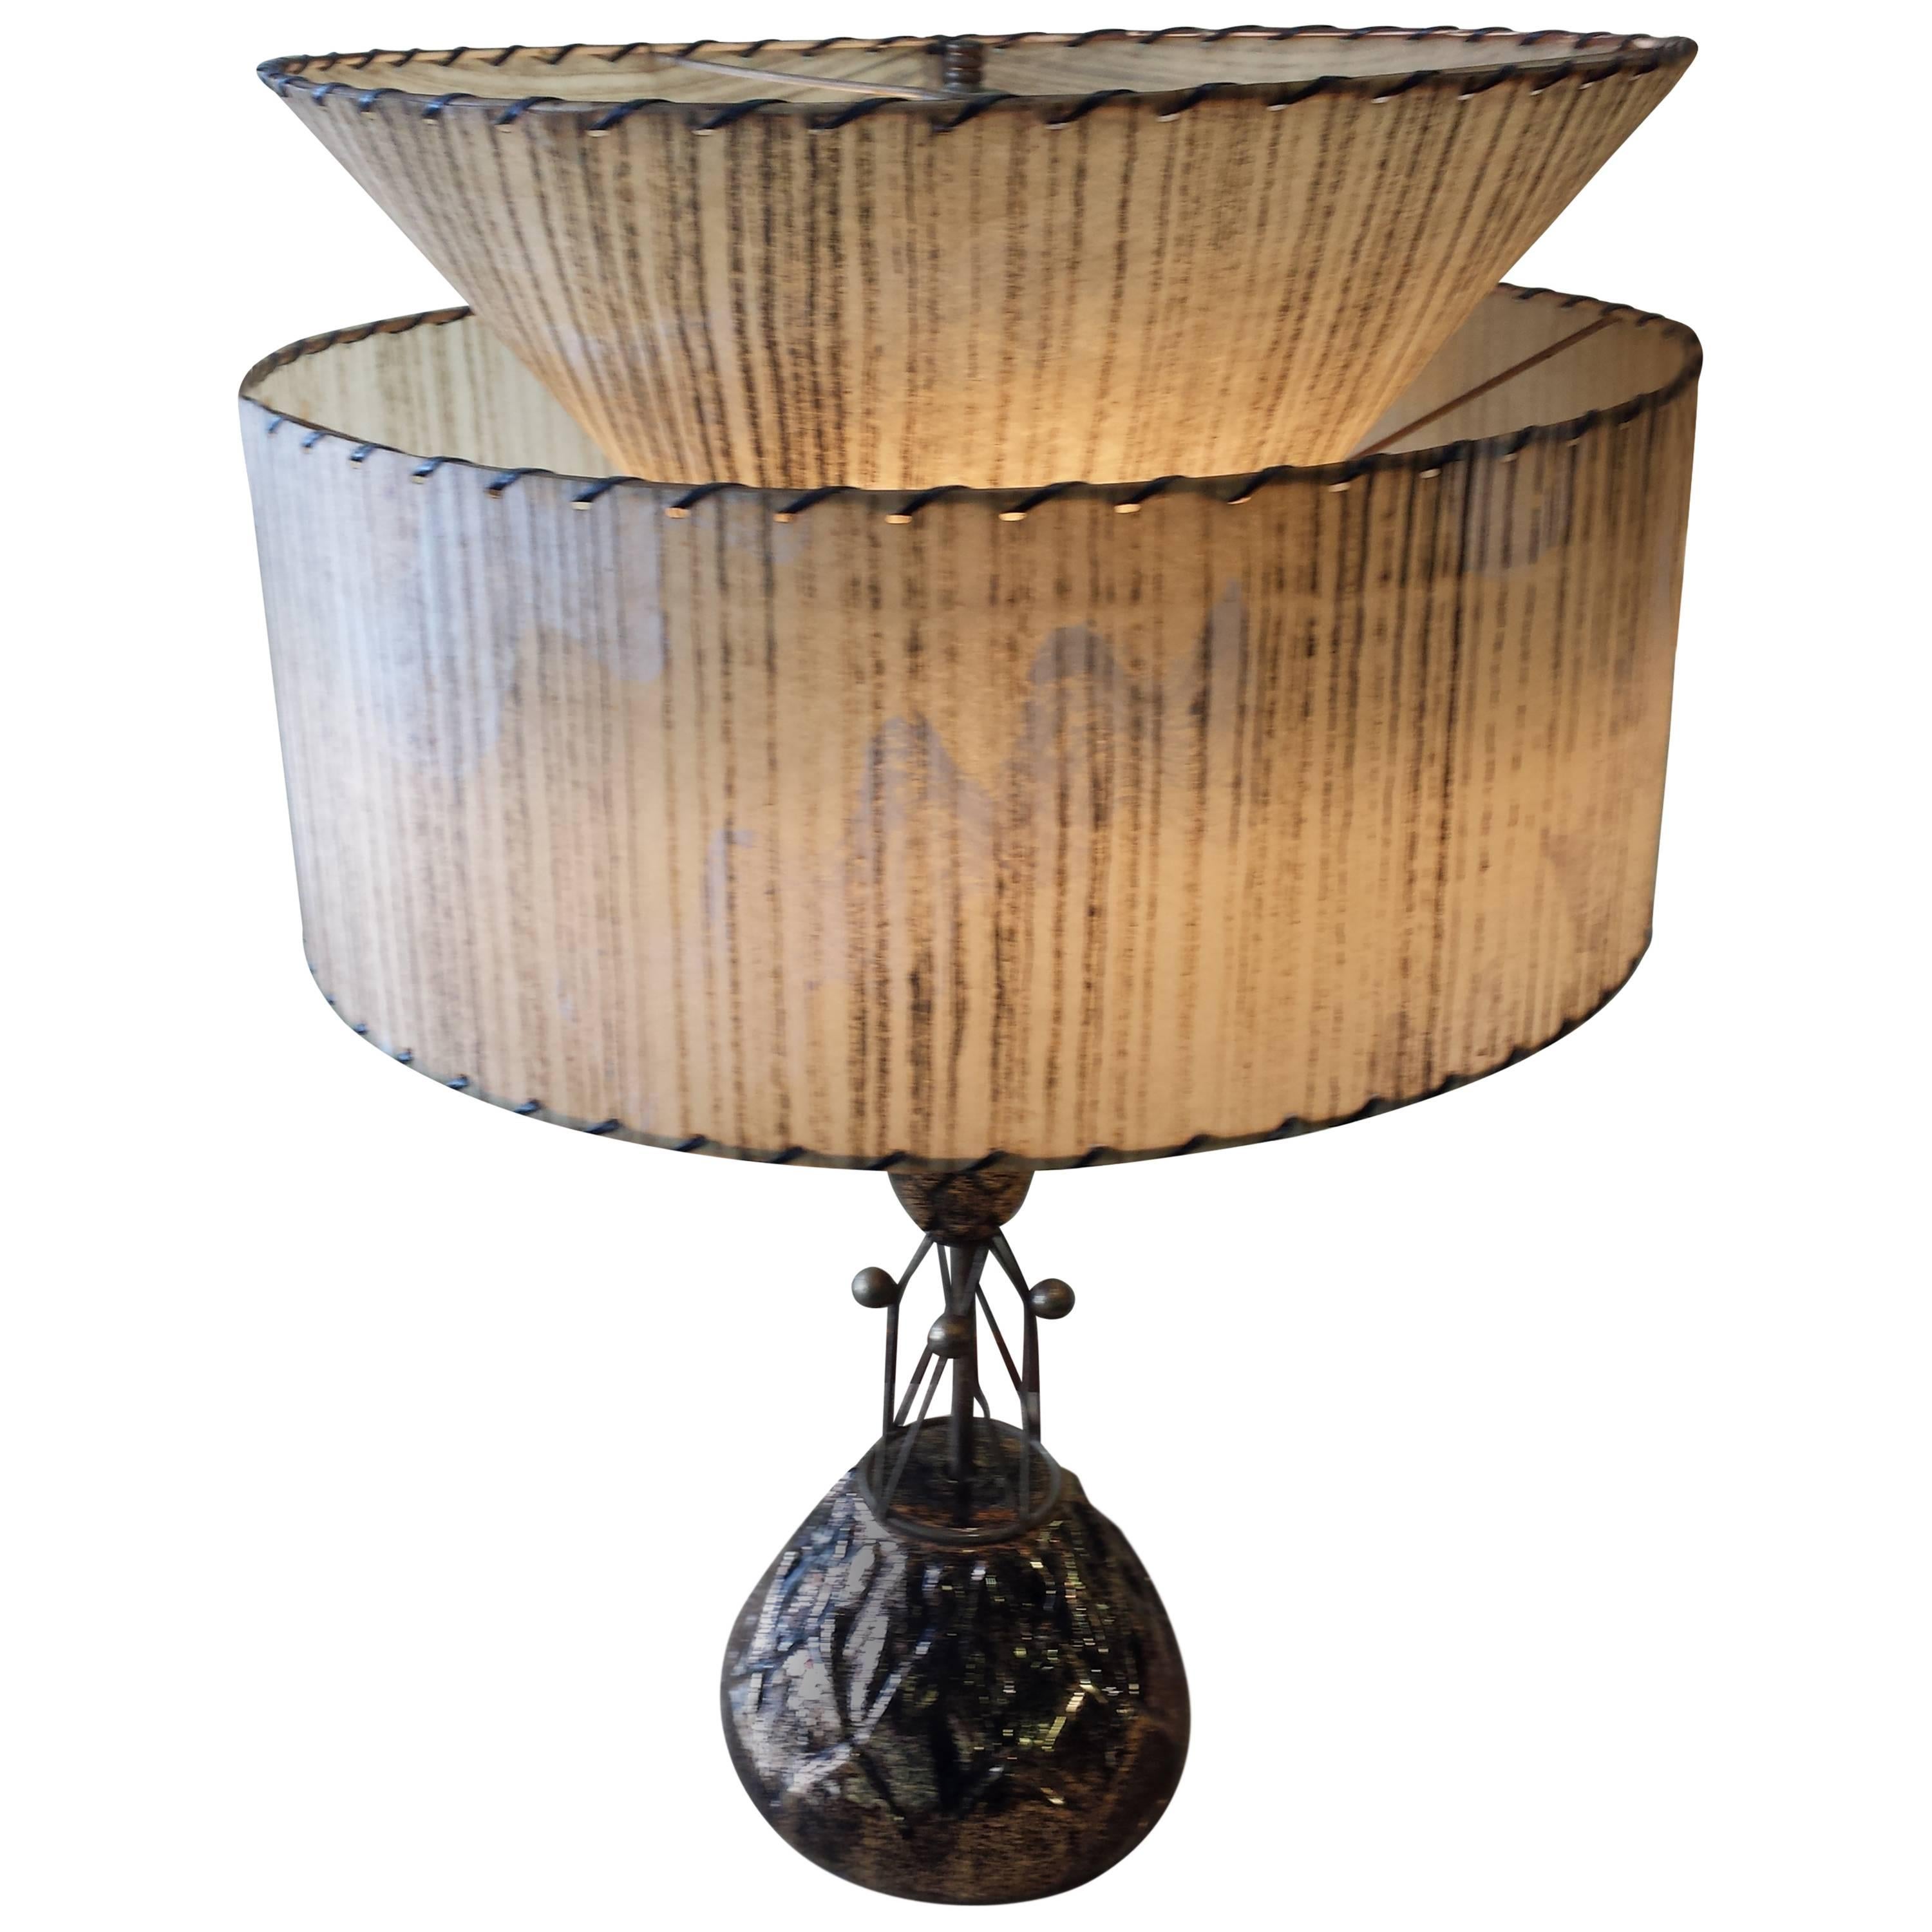 1950s Ceramic and Brass Table Lamp with Fiberglass Two-Tier Shade